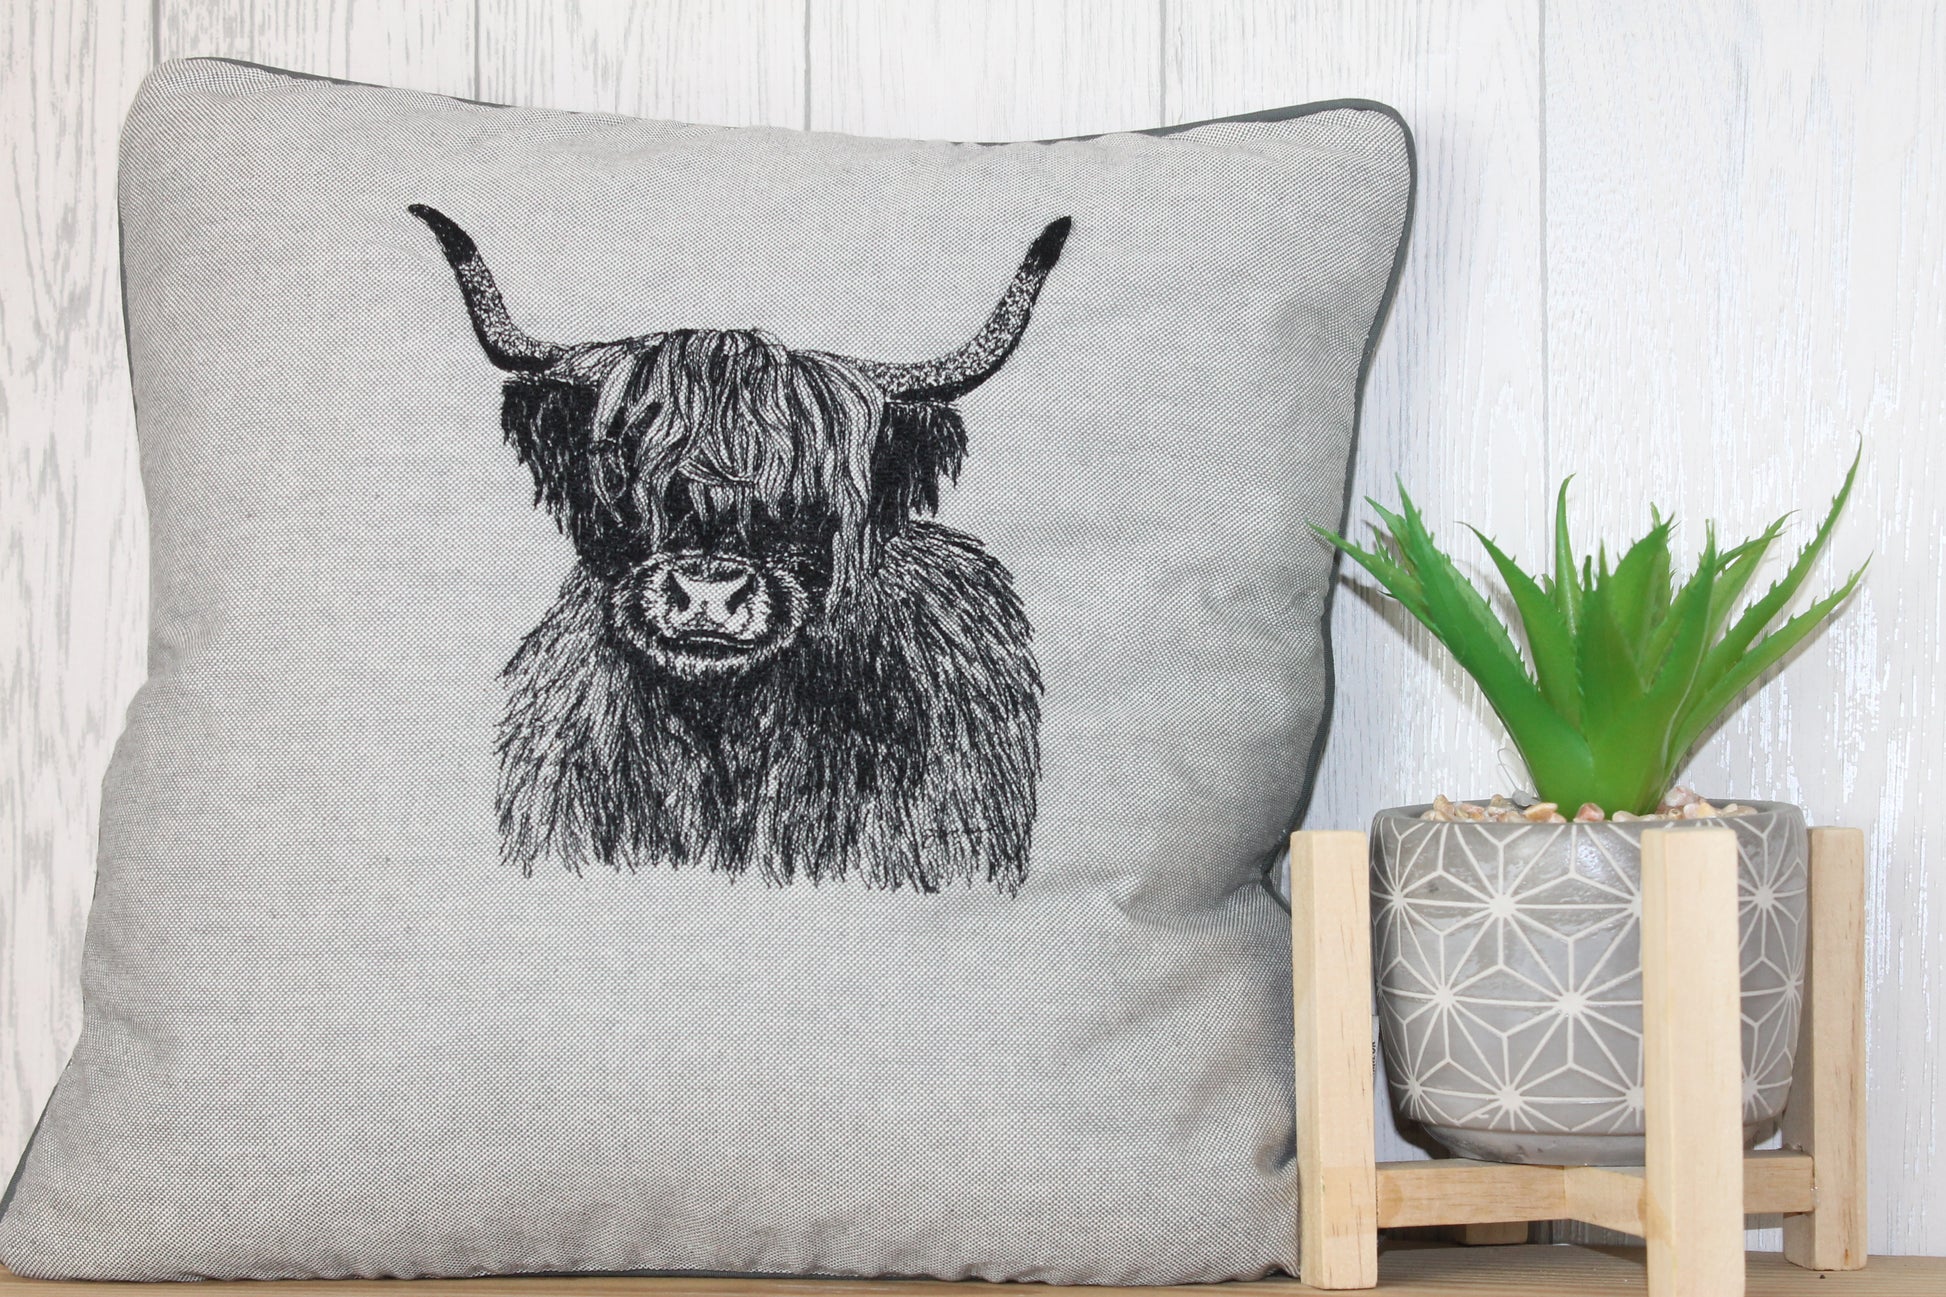 Highland Cow Cushion, Grey Piped Embroidered Cushion - Lizzie Dixon Designs